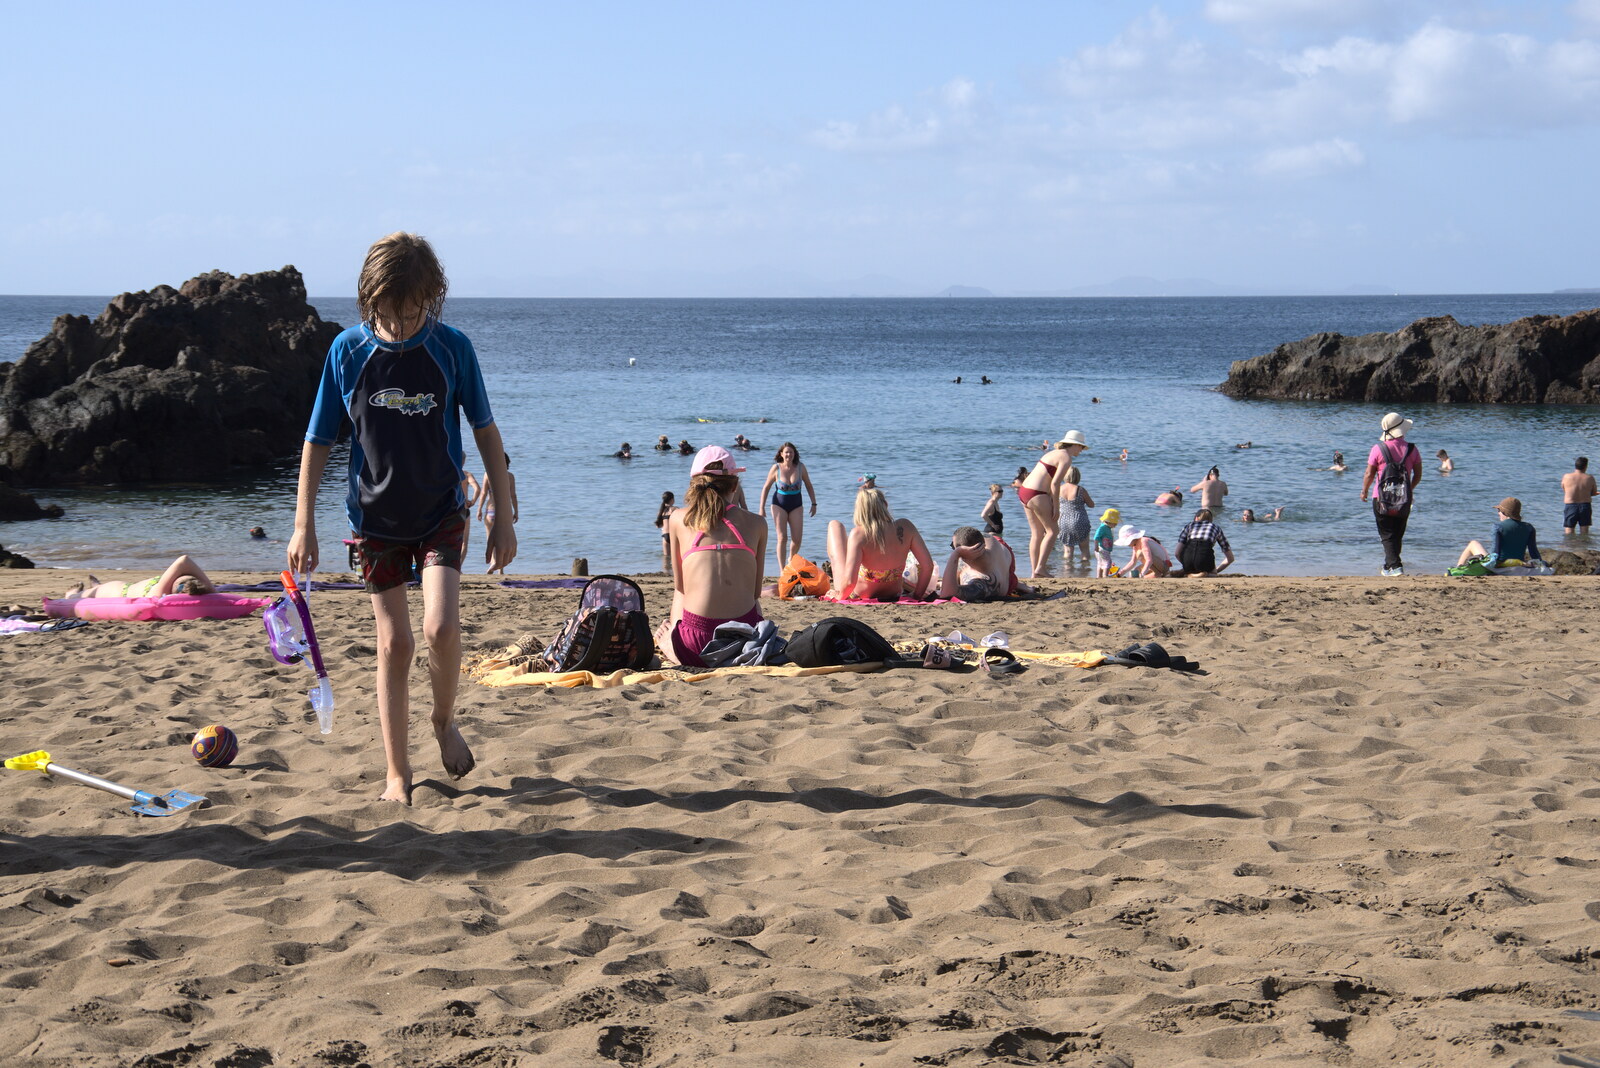 Harry stomps up the beach at Playa Chica from Five Days in Lanzarote, Canary Islands, Spain - 24th October 2021